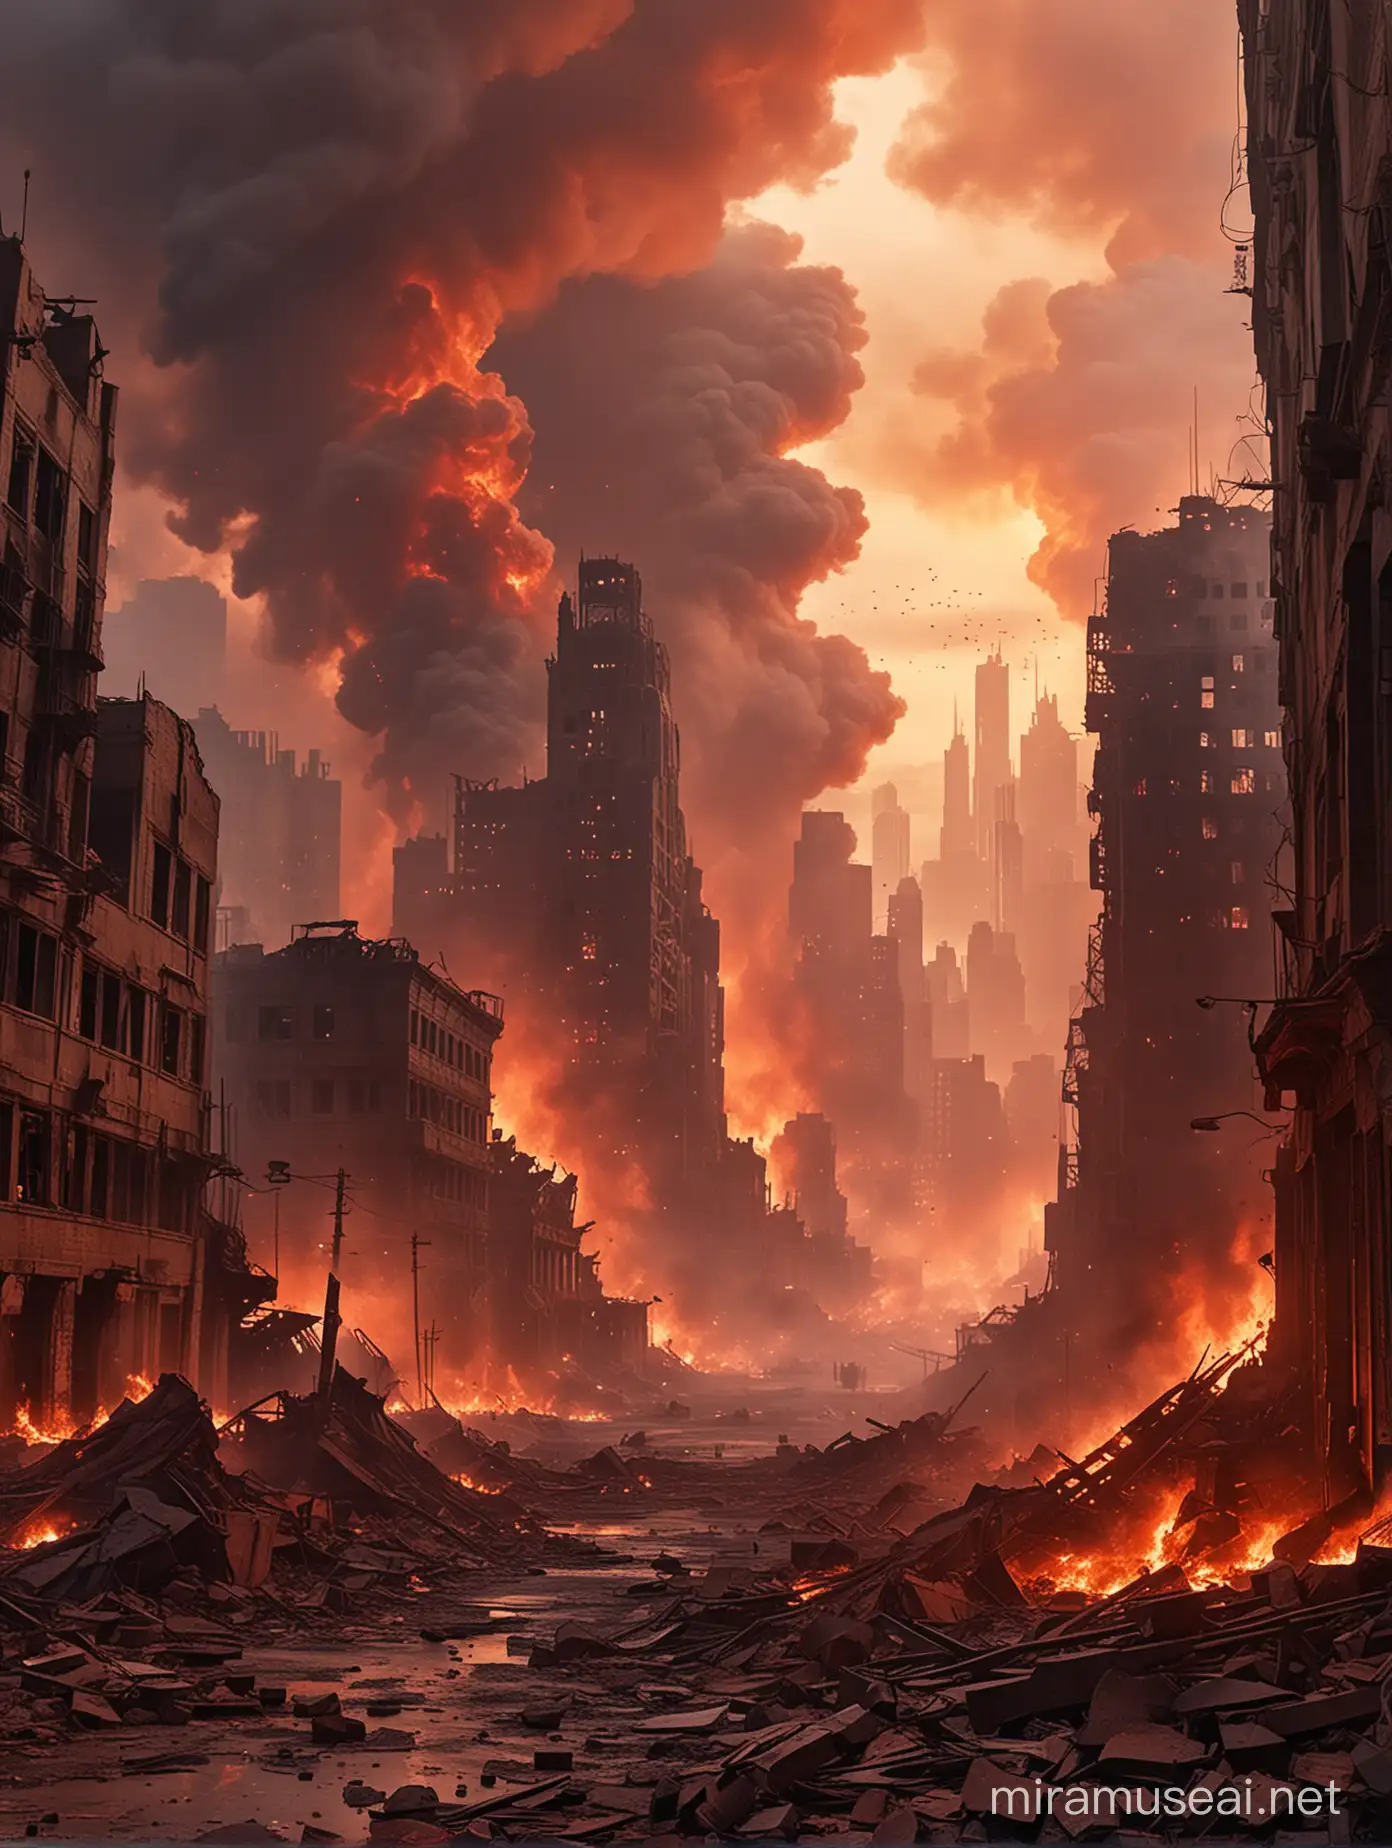 landscape, city in ruins, marvel sentinel lies smouldering in the ashes, the sky is red from smoke and flames, crumbling skyscrapers blot the skyline
